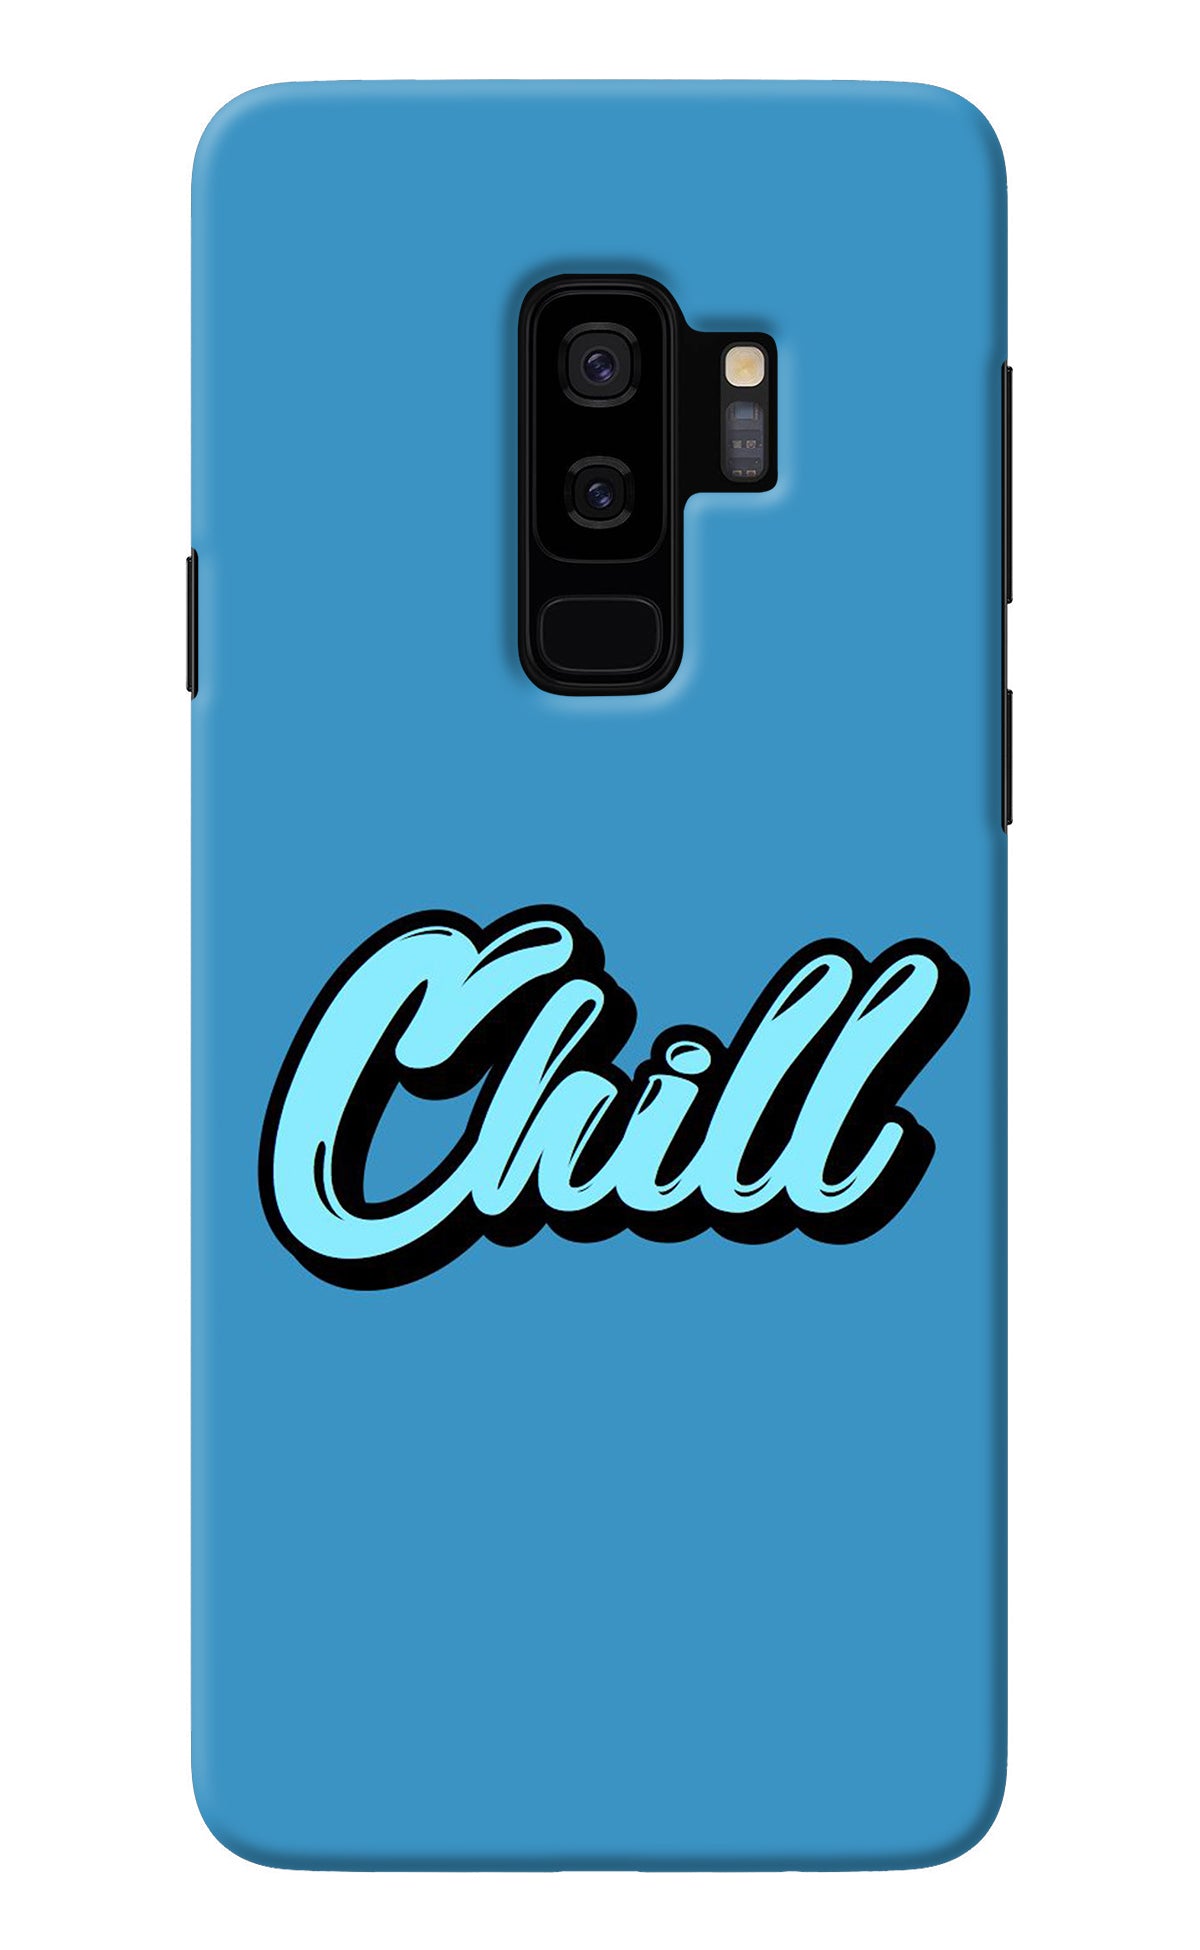 Chill Samsung S9 Plus Back Cover